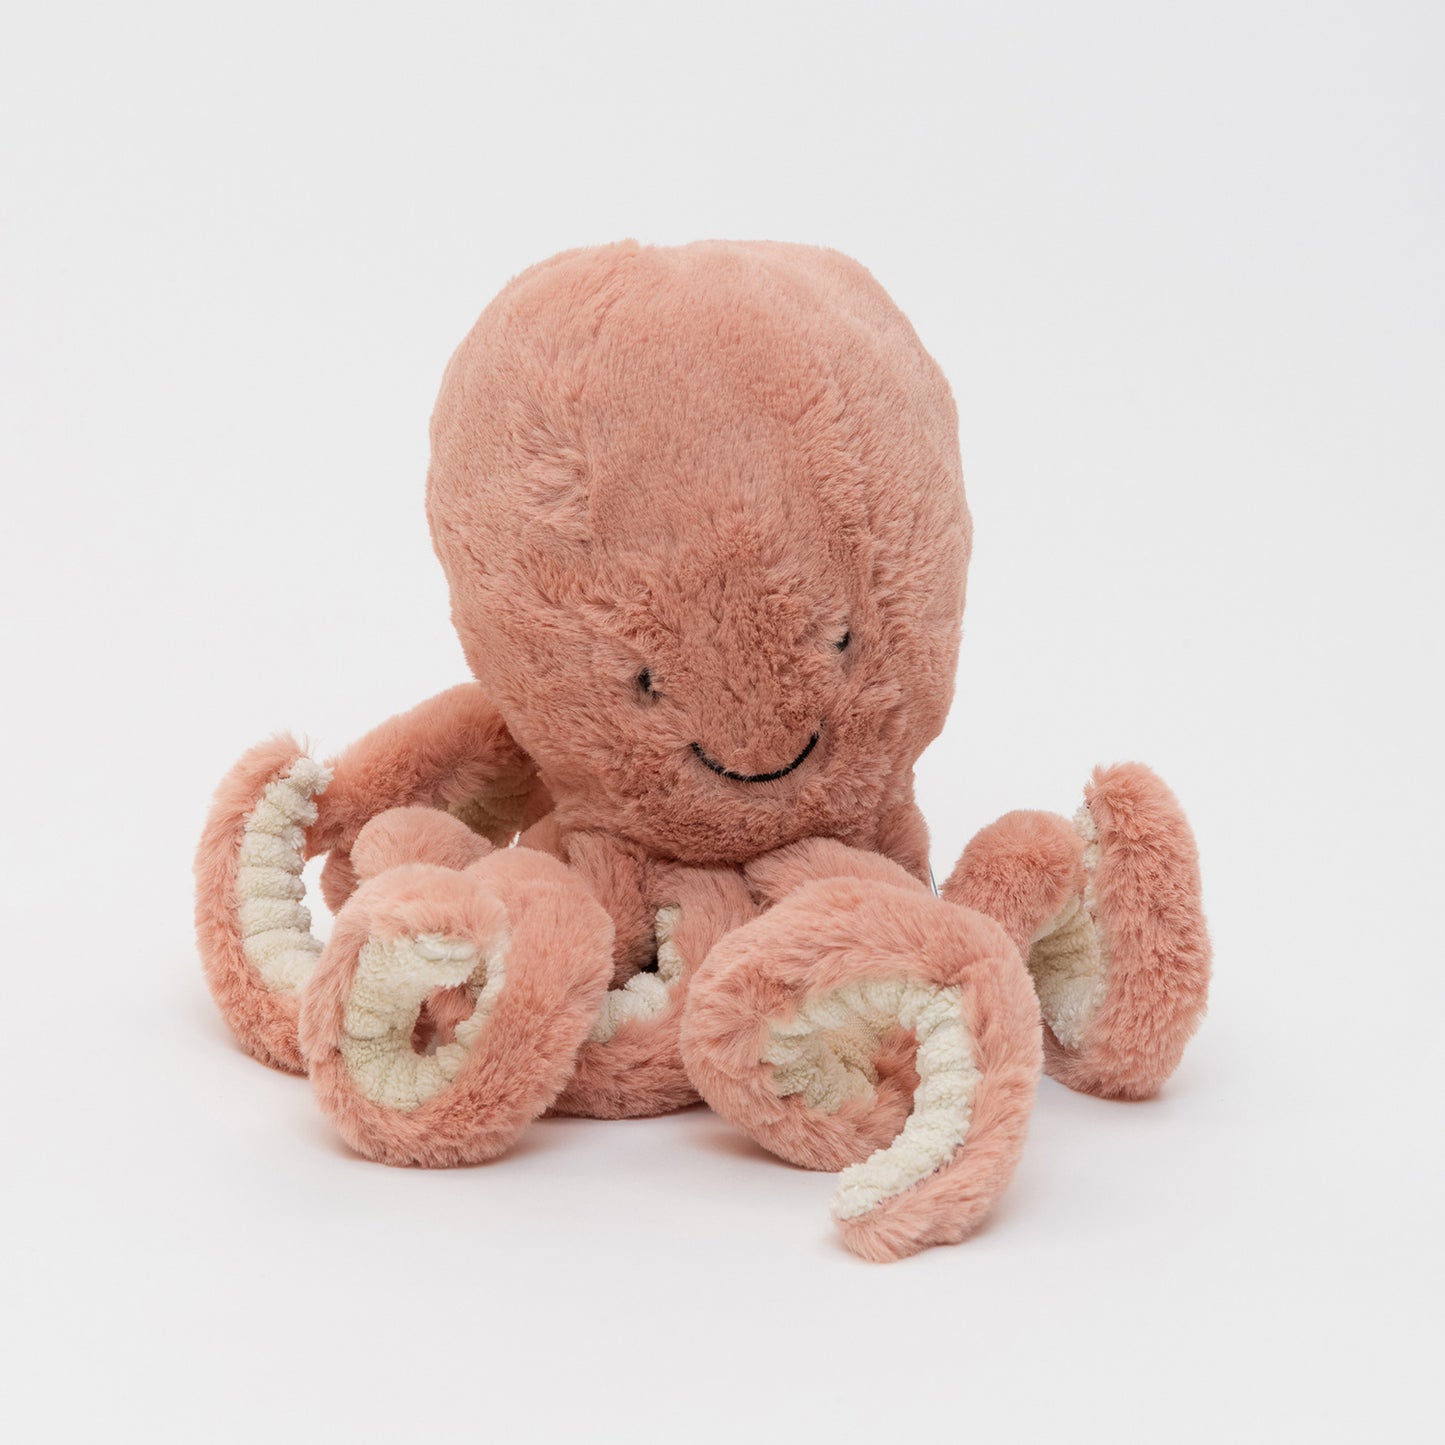 A pink Jellycat plush octopus soft toy on a white background.